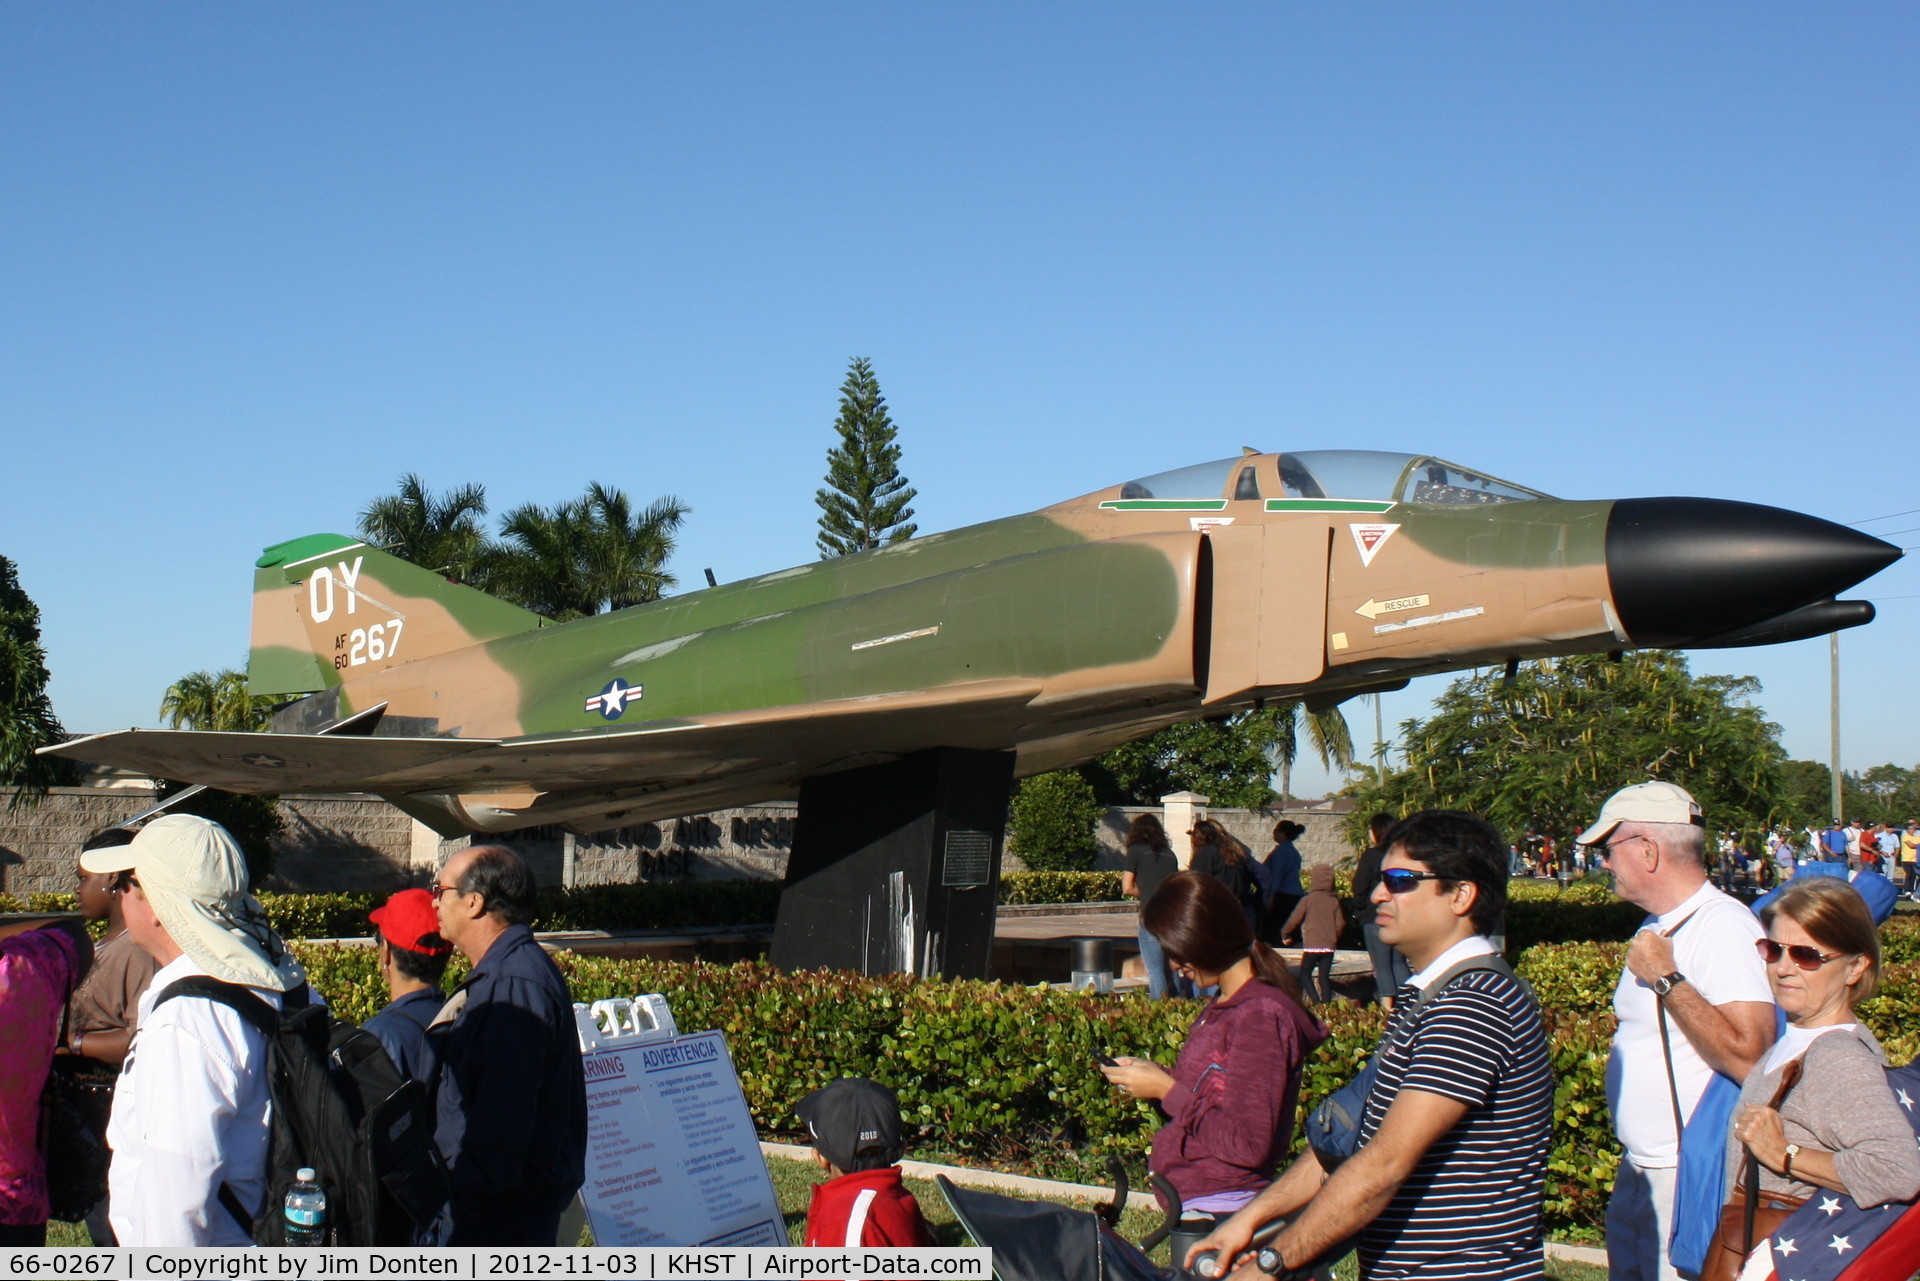 66-0267, 1966 McDonnell F-4D Phantom II C/N 1933, F-4E Phantom II  of the 482nd Fighter Wing at Homestead Air Reserve Base  (60-267) sits on display outside Homestead Air Reserve Base